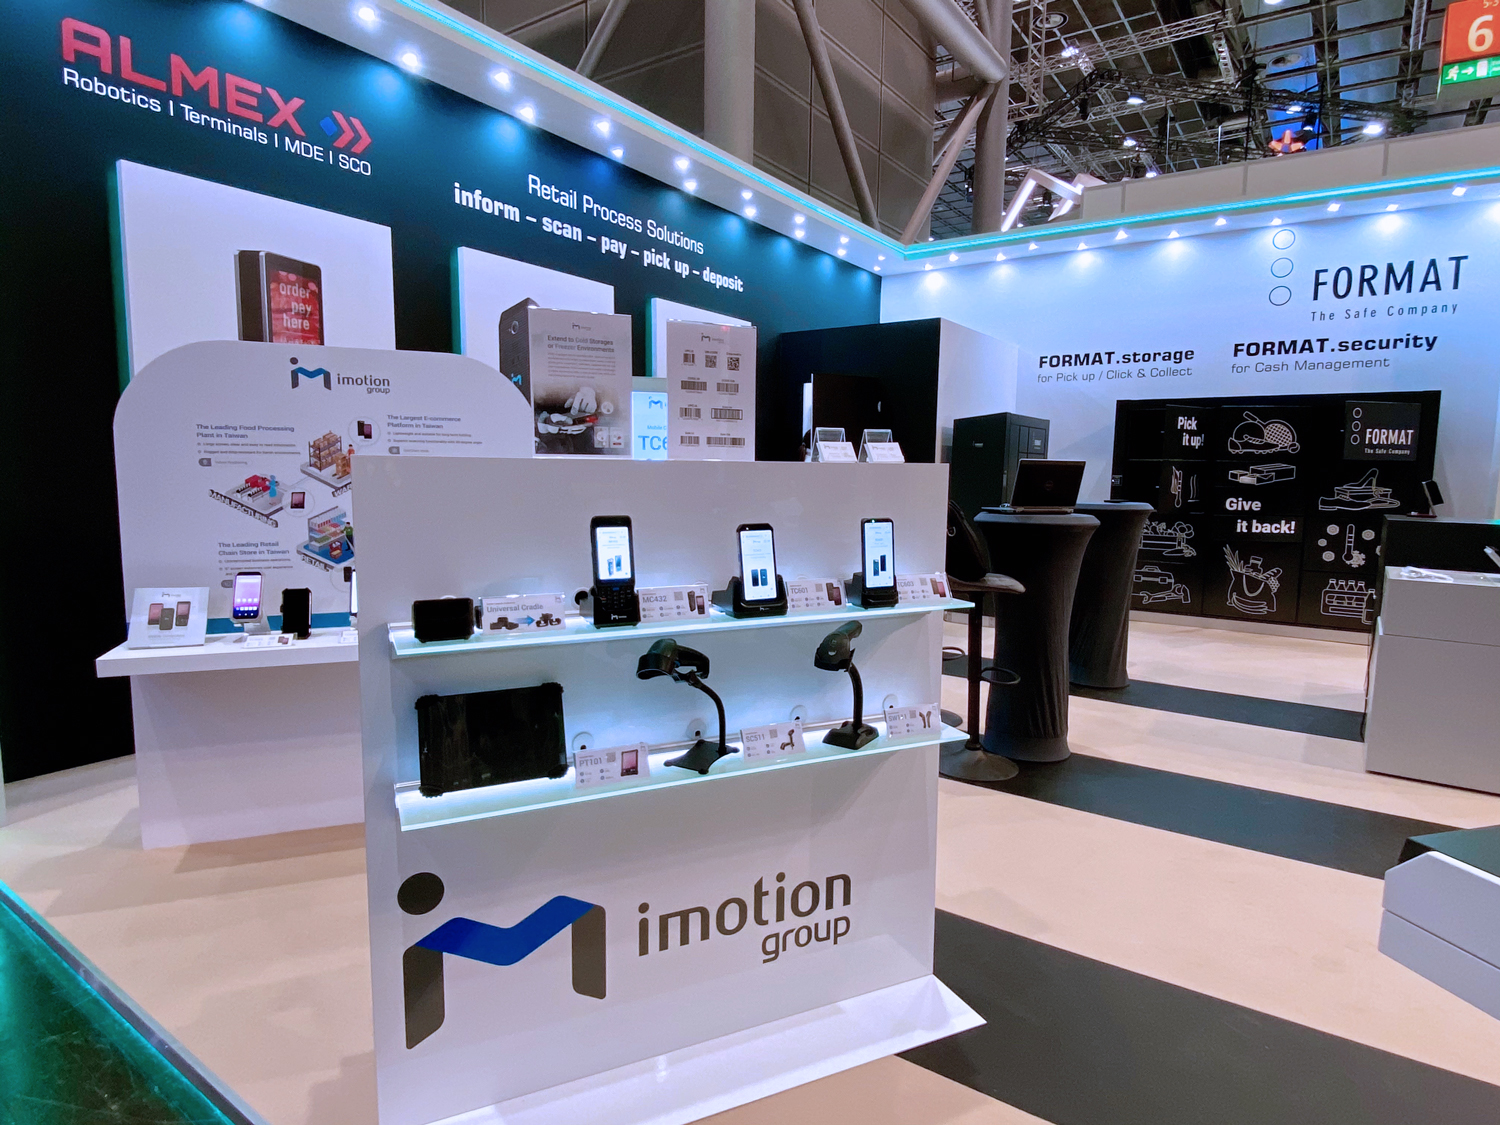 iMotion Group Debuts at EuroShop, the German Retail Exhibition, Focusing on the Latest Digital Retail Technology Applications